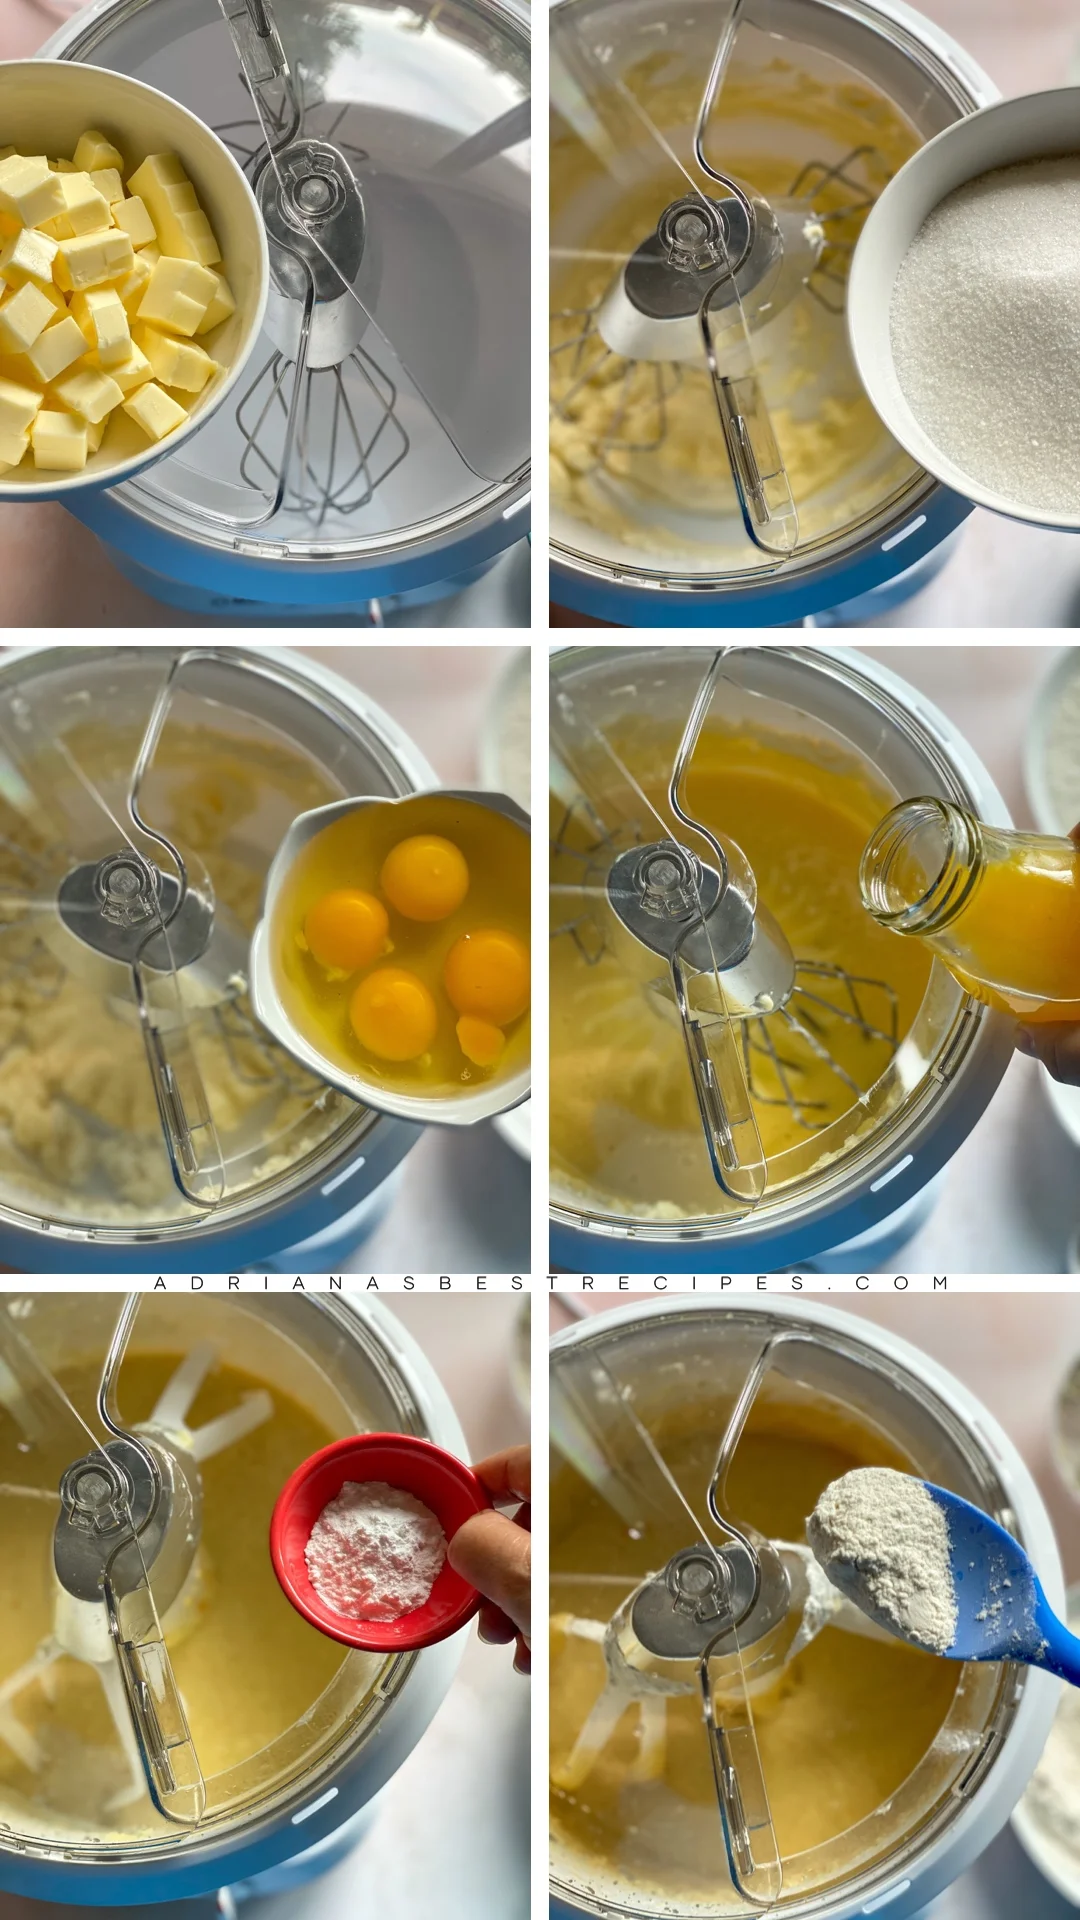 Step by step on how to make the batter